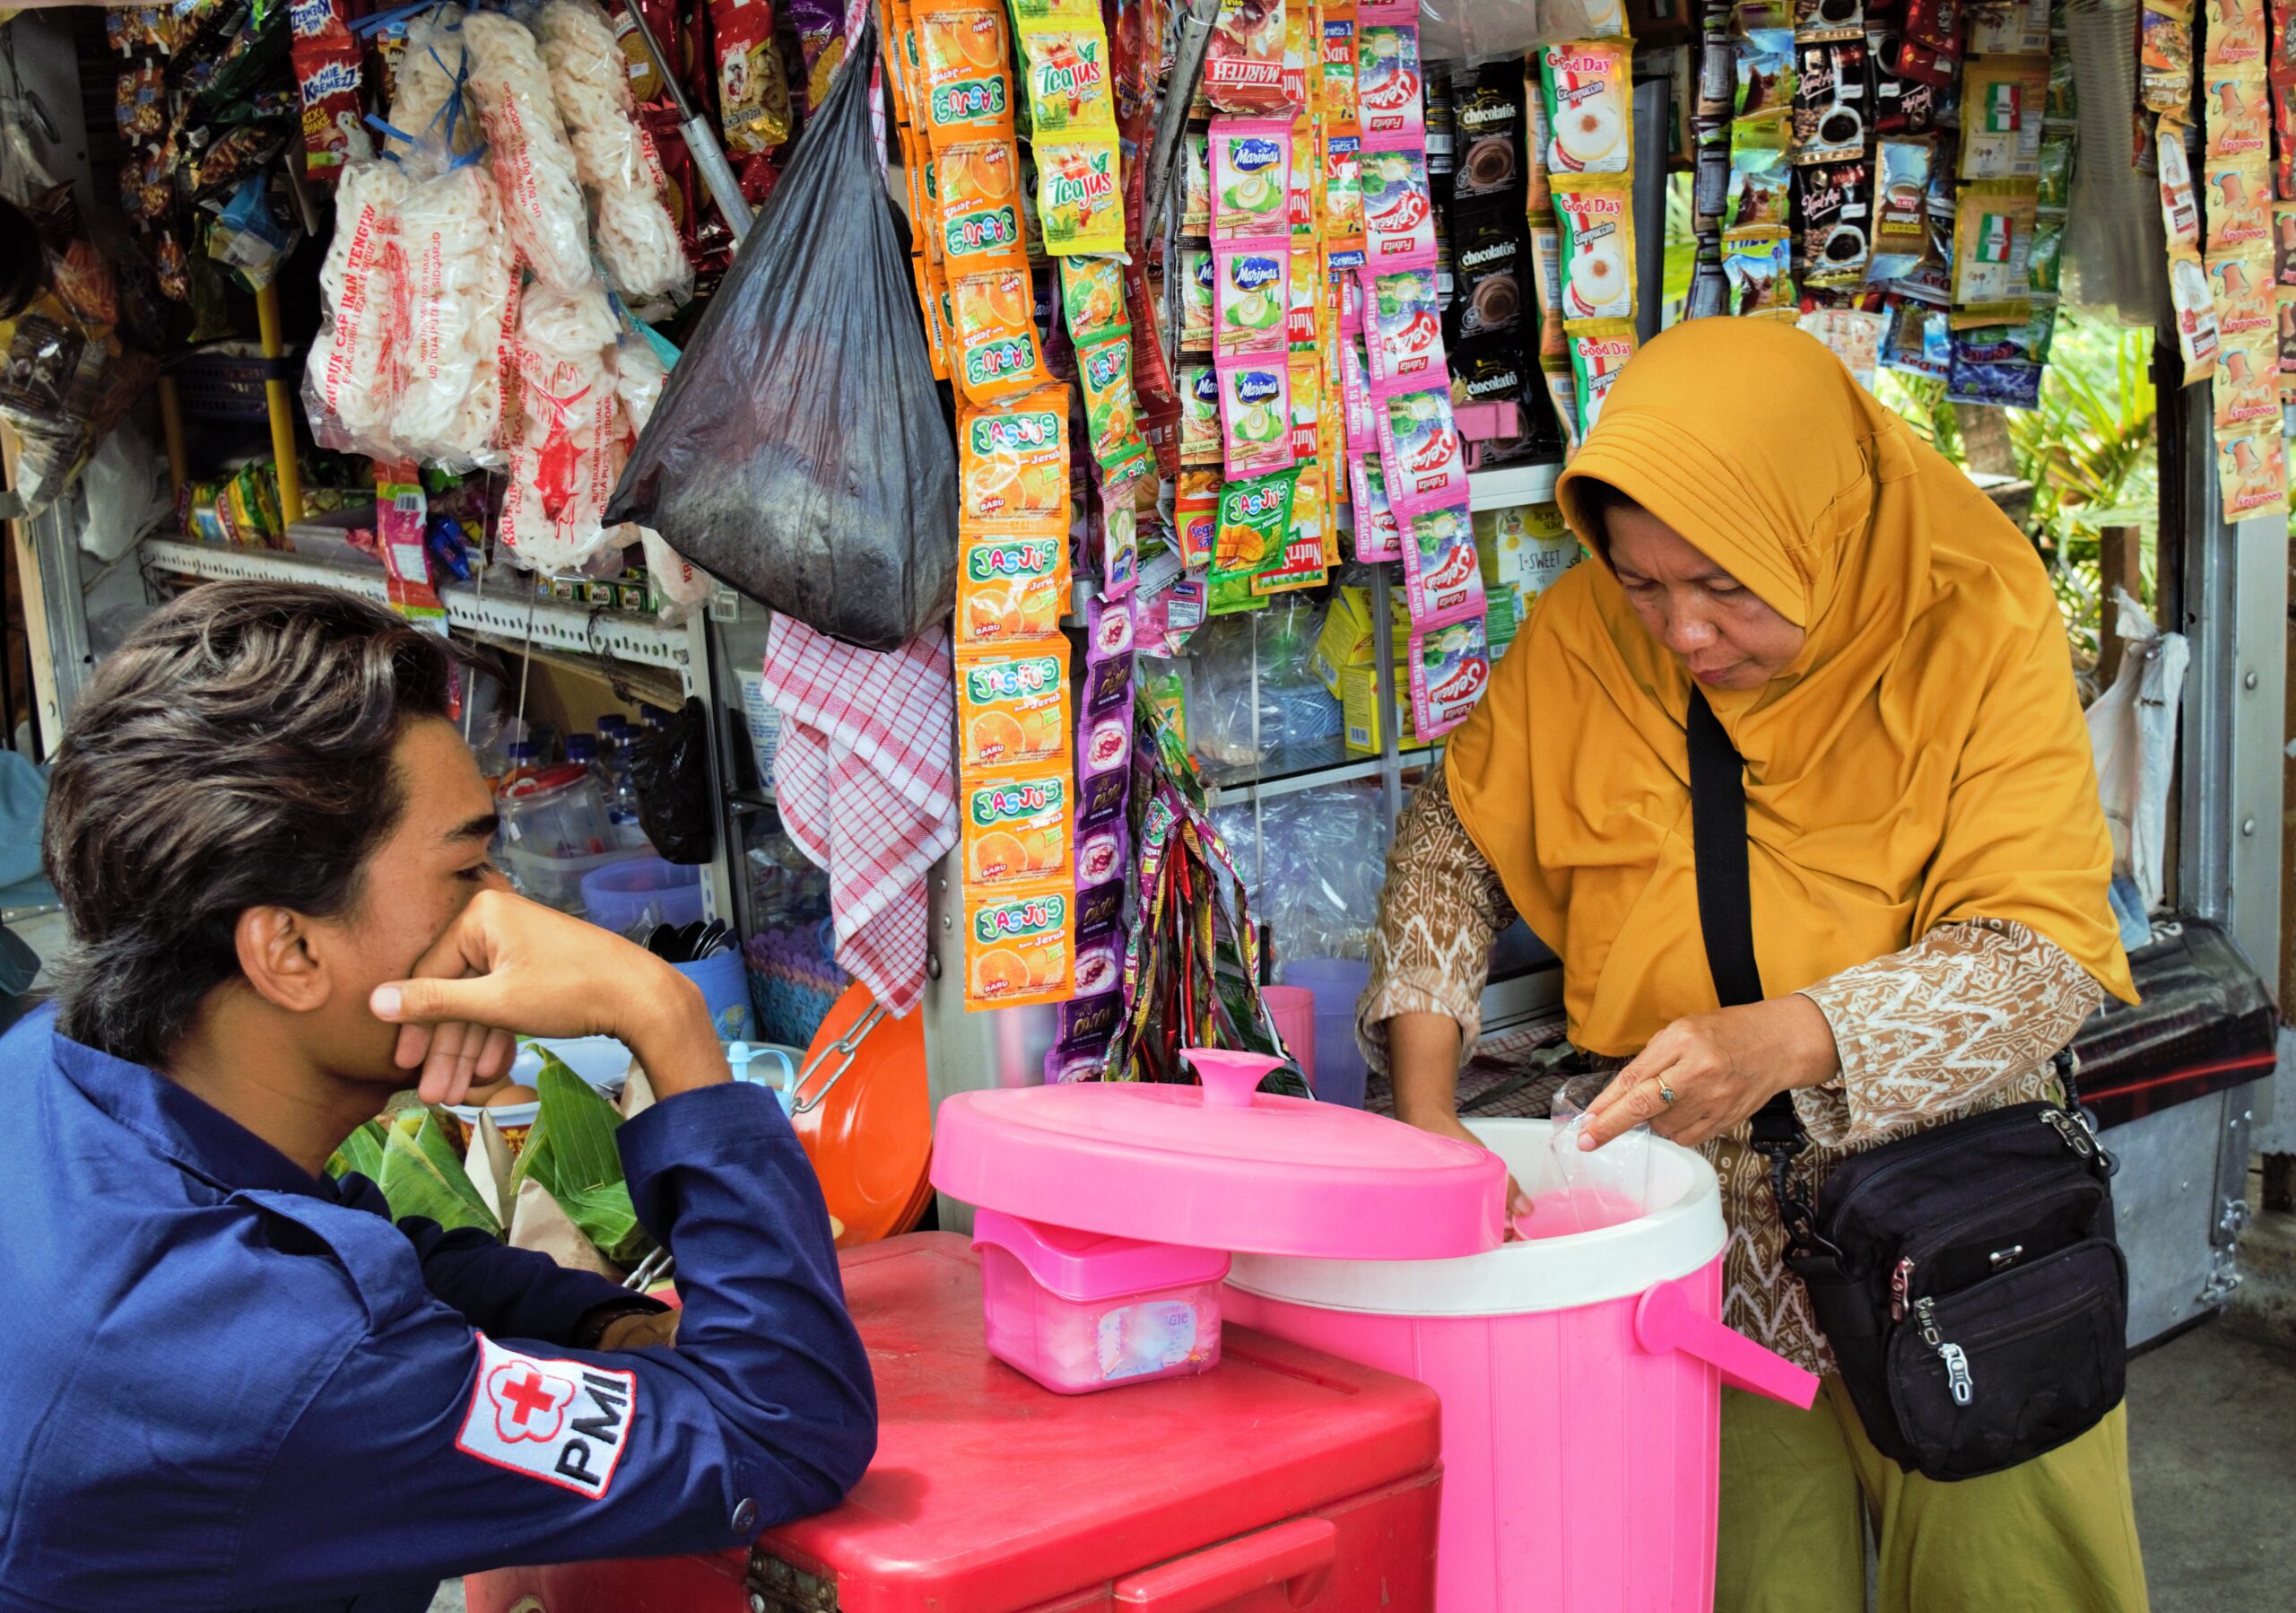 A female shopkeeper in Indonesia scooping water from a pink bucket, serving a Red Cross Volunteer in a blue shirt.